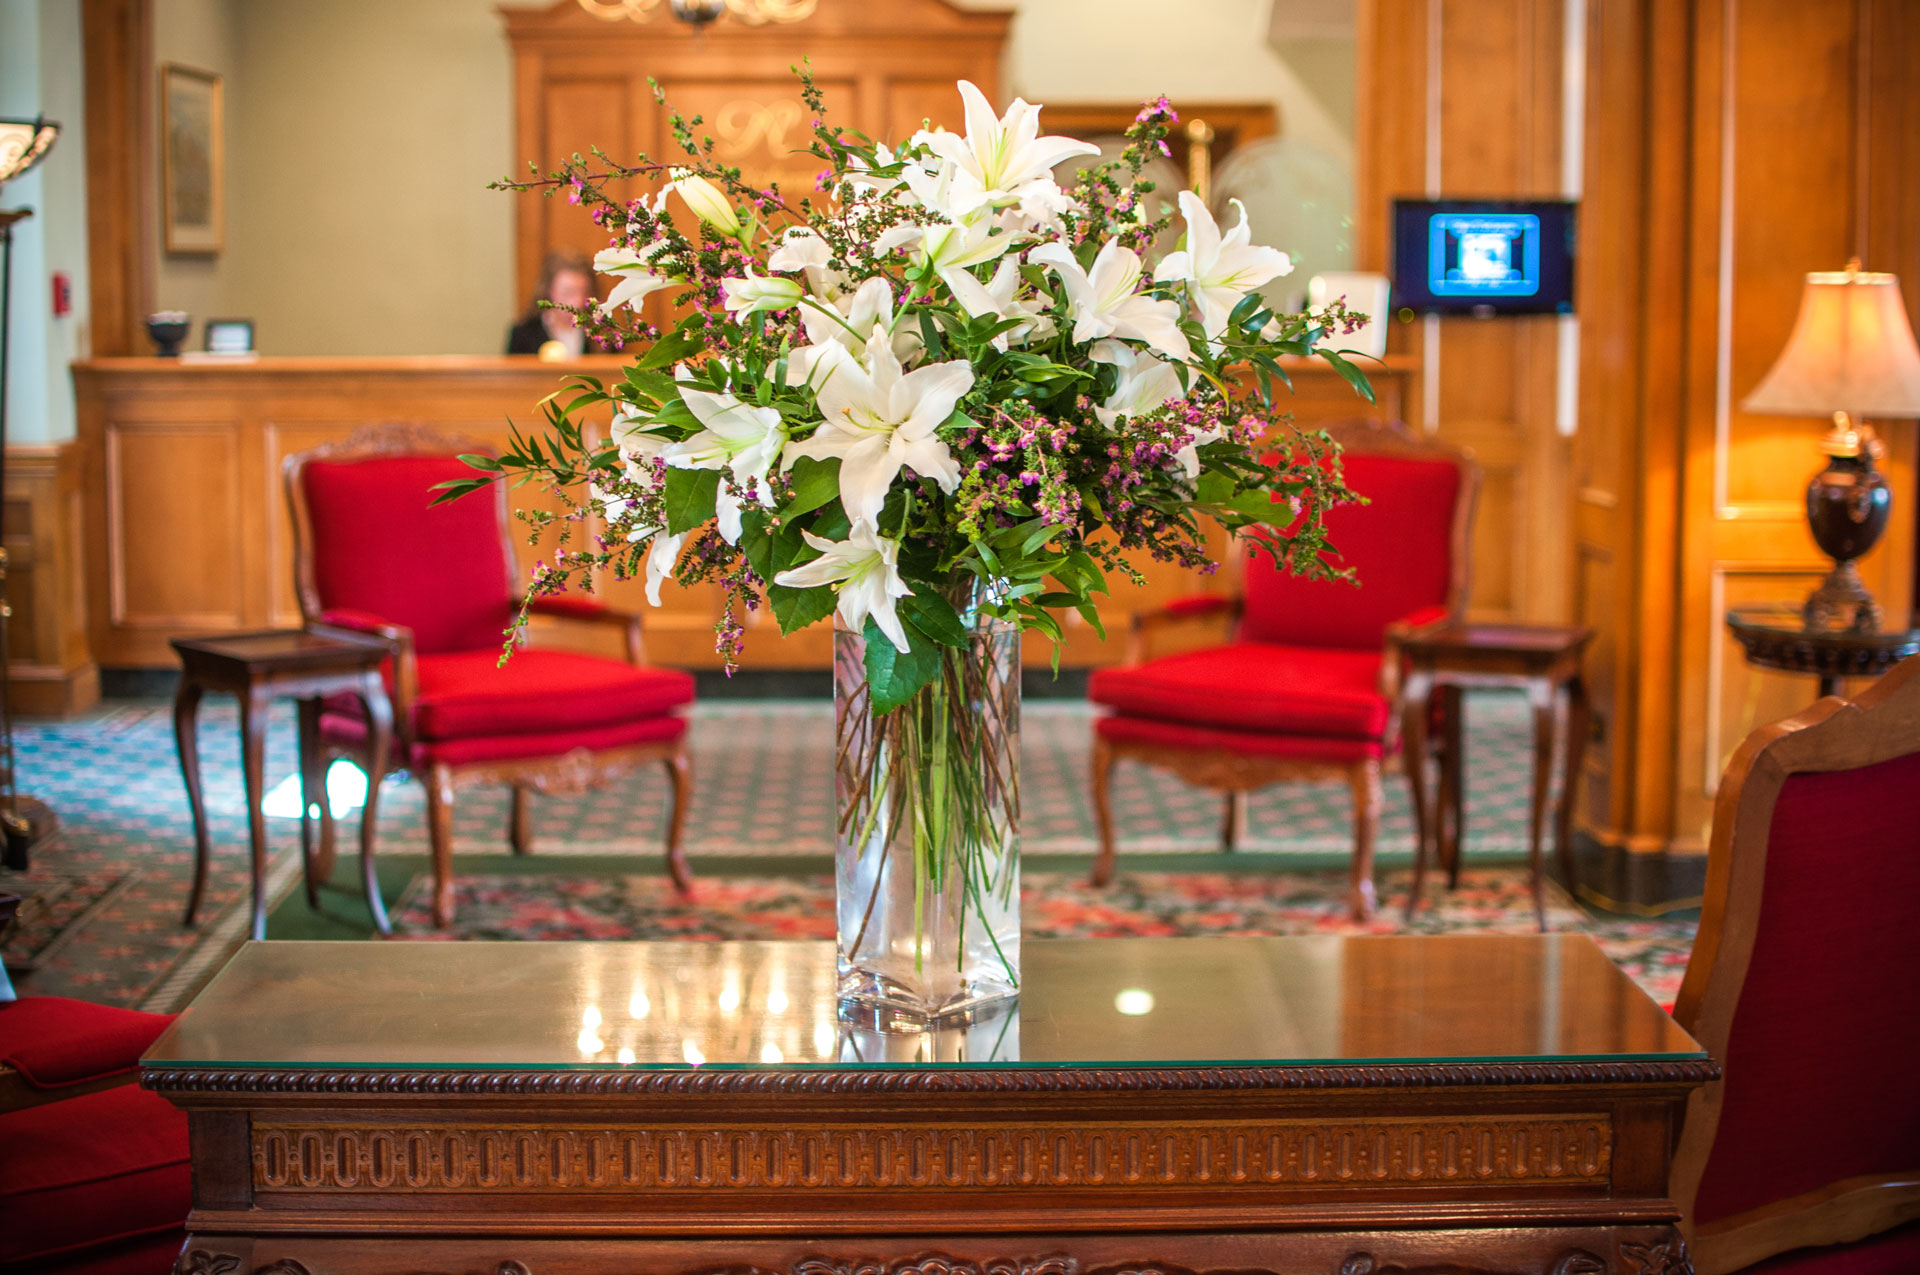 Flowers before the front desk in the Foyer